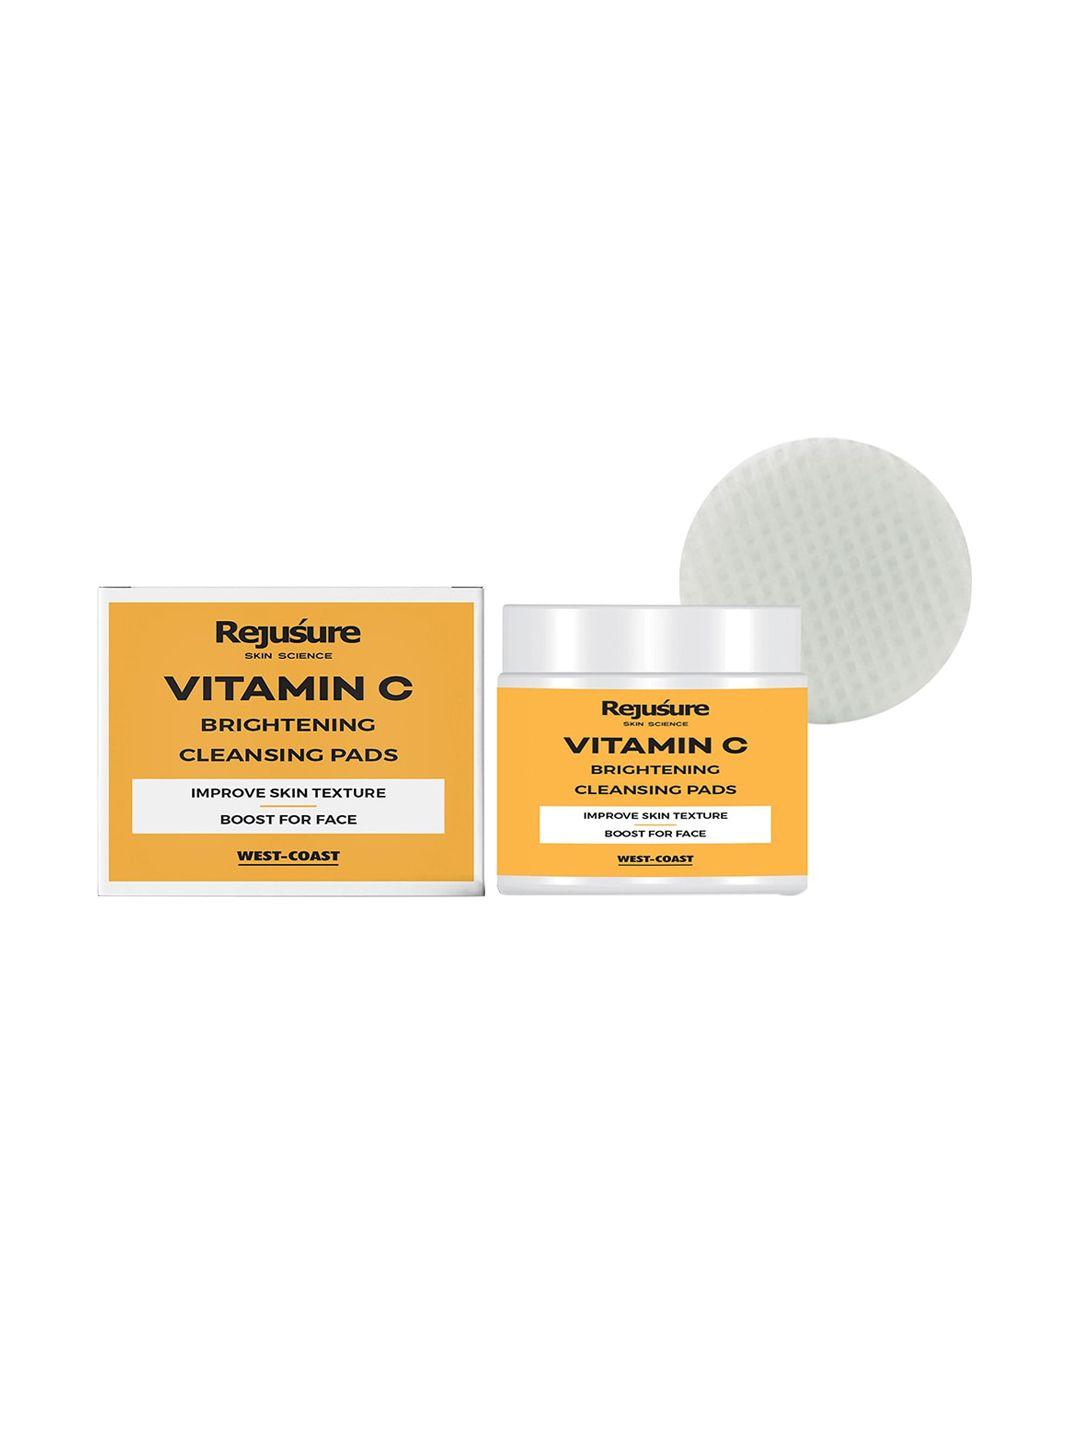 rejusure vitamin c brightening cleansing pads to improve skin texture - 50 pads